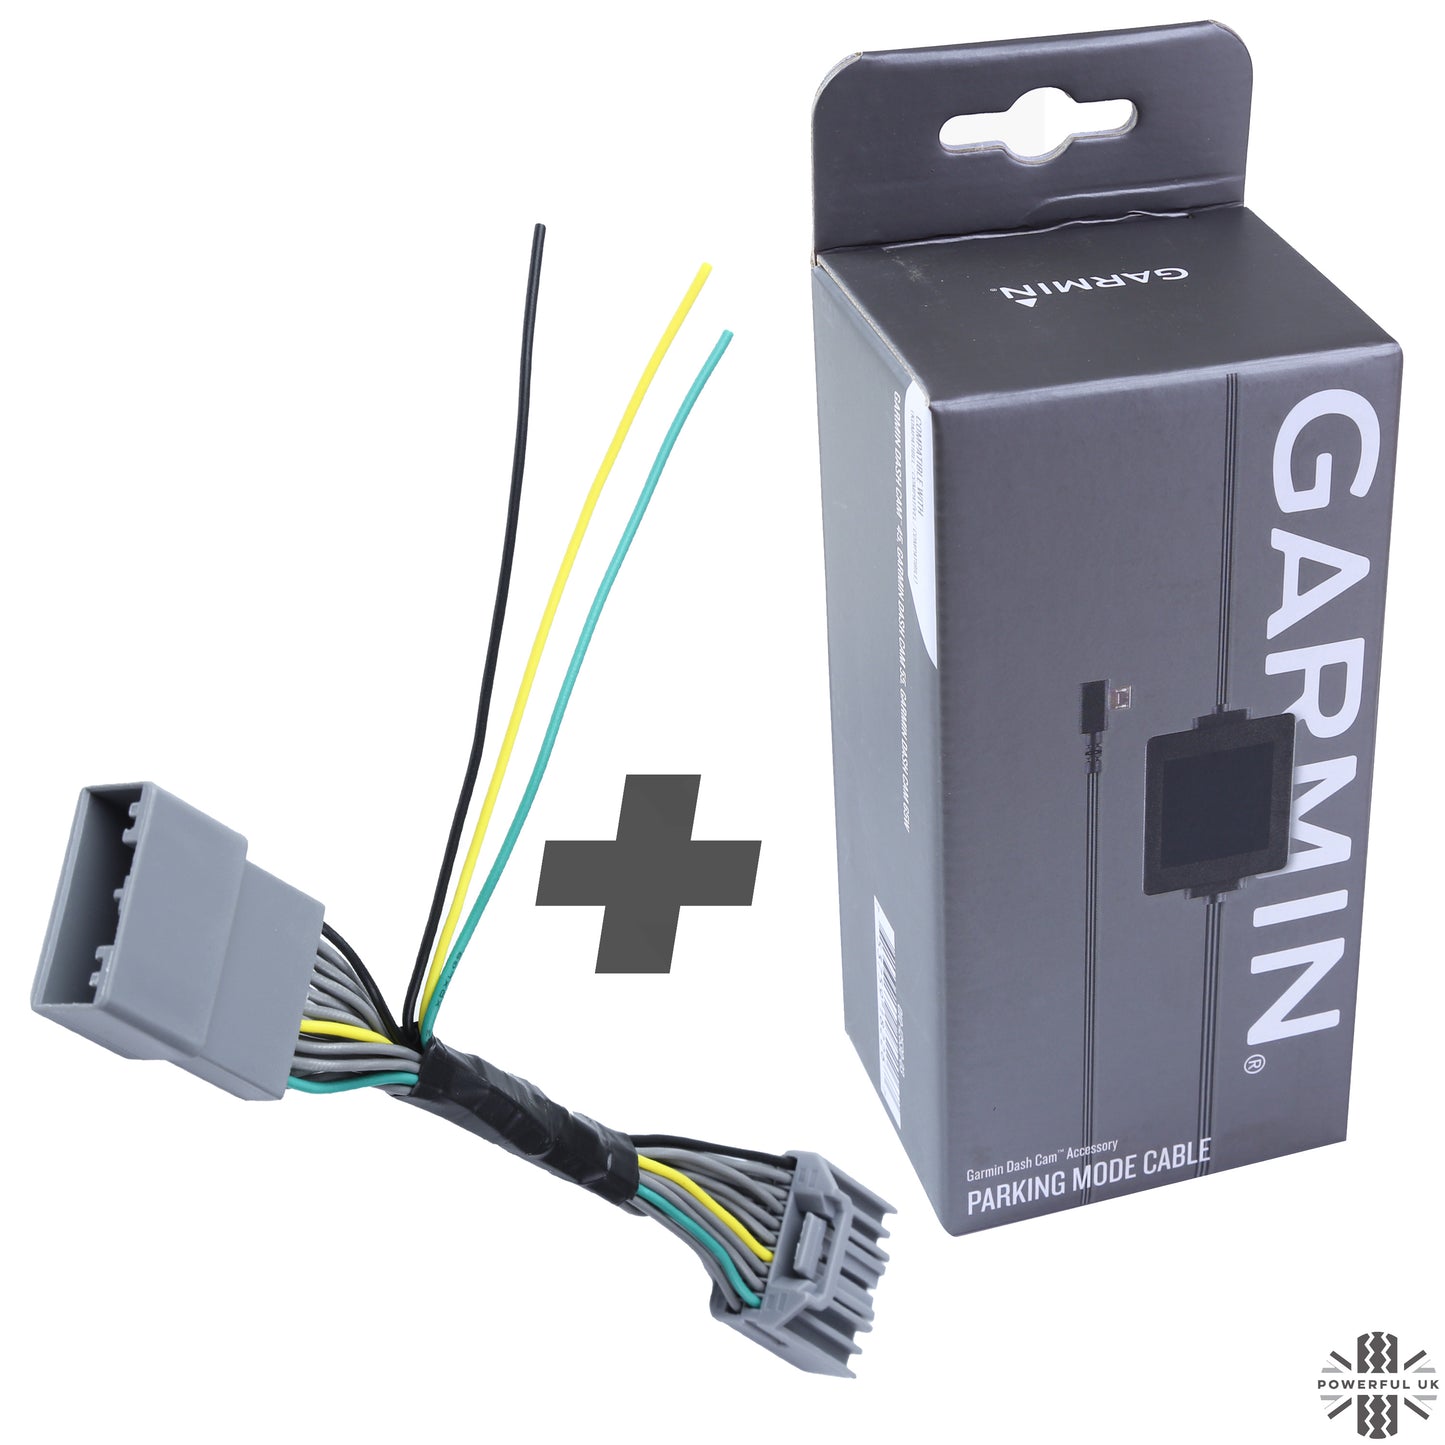 Dash Cam Wiring Kit - Tap-in Loom + Garmin Hardwire Kit for Jaguar XF with EARLY overhead console (2009-15)